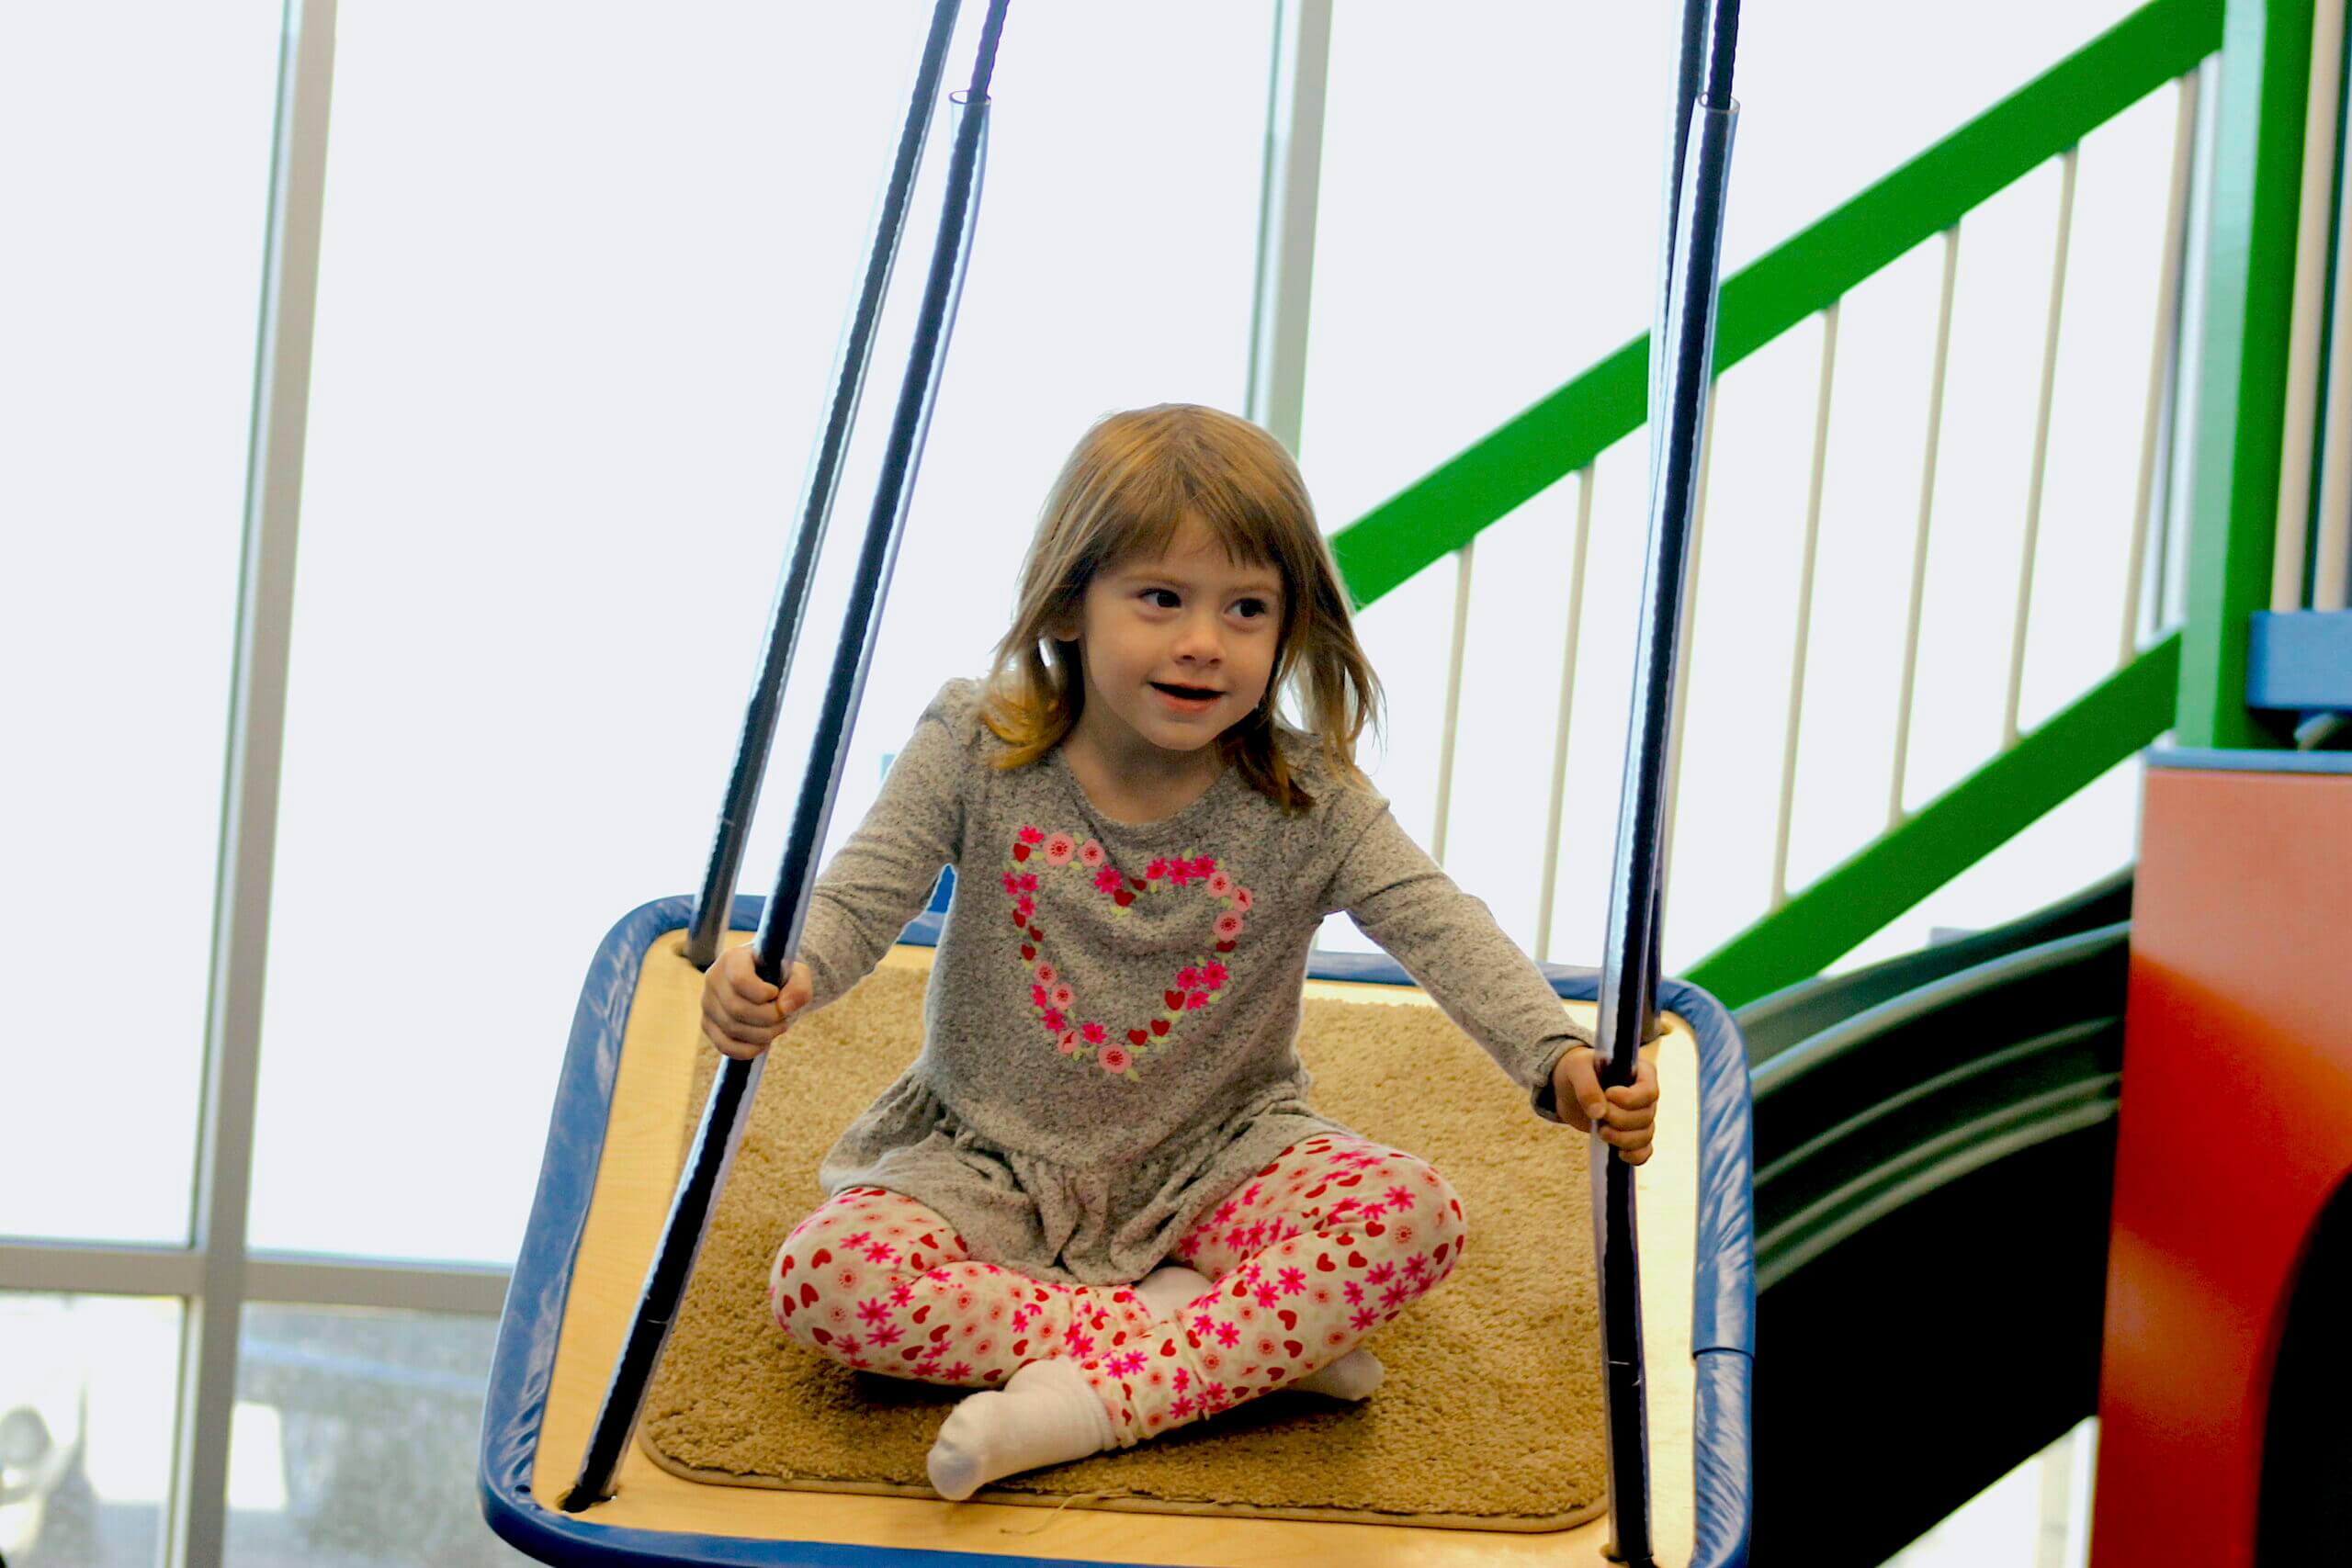 Child with autism in sensory swing